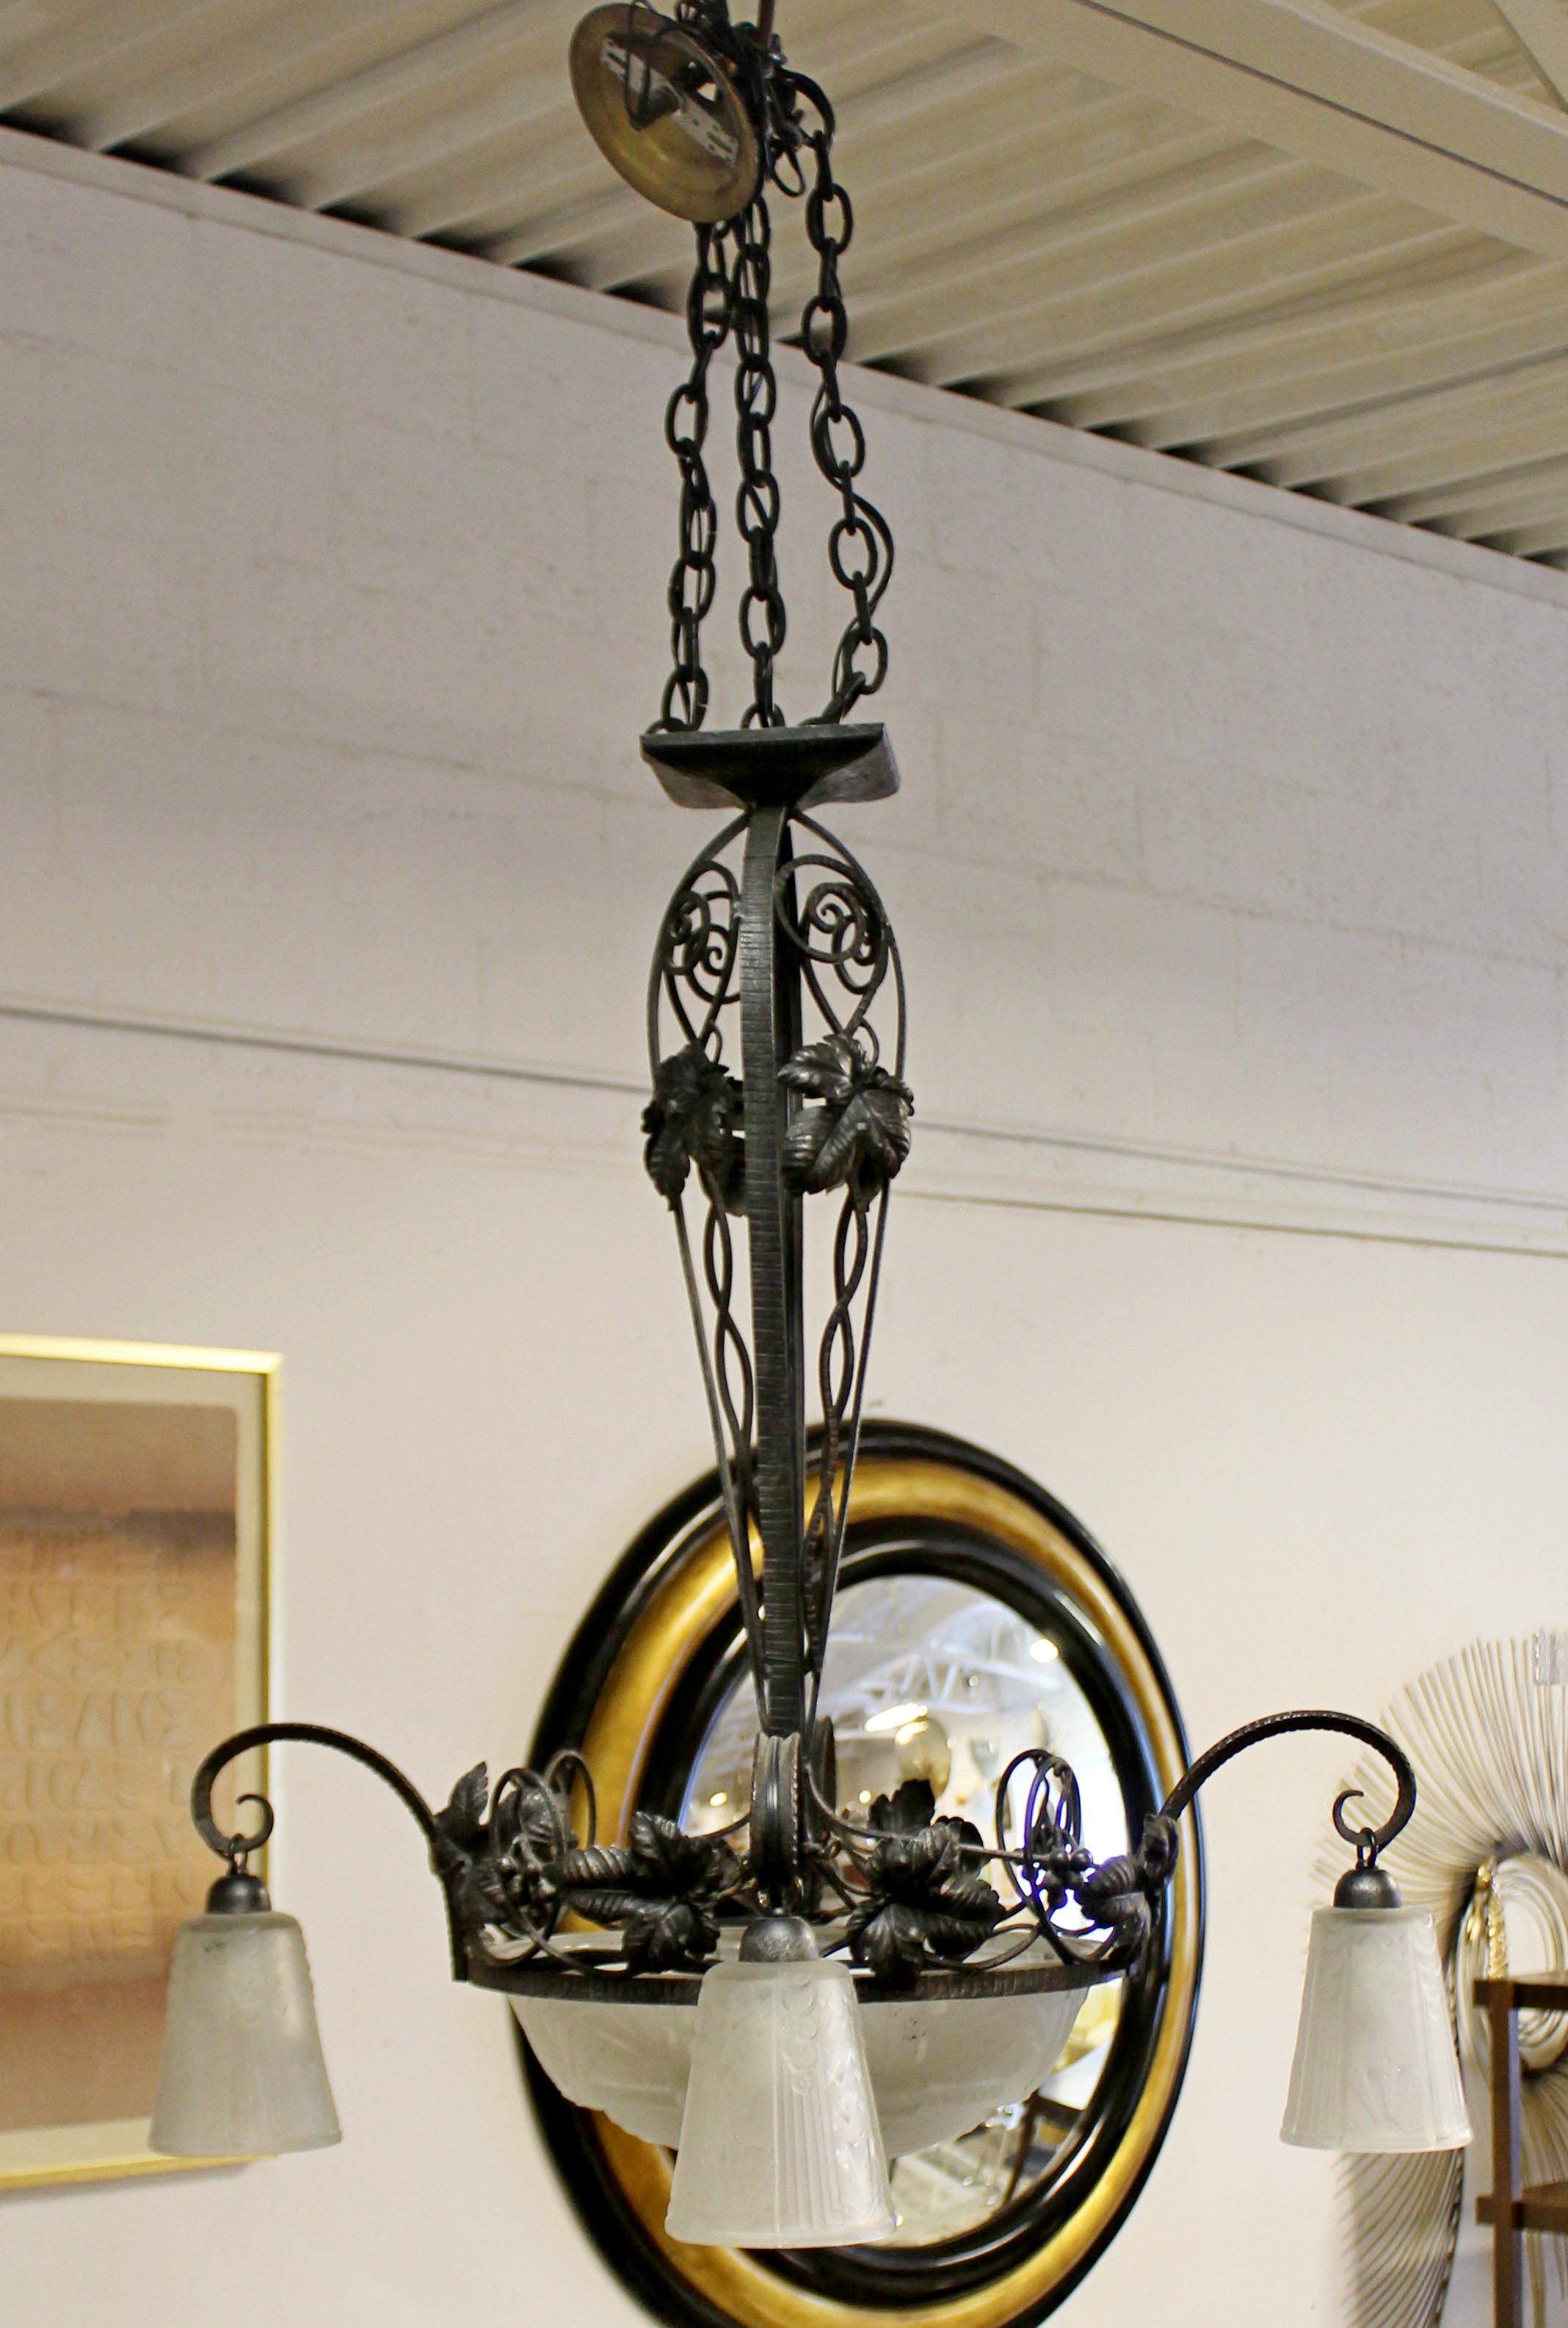 For your consideration is an incredible, wrought iron and glass, hanging light fixture chandelier, by Muller Frères, circa 1920s. In excellent antique condition. The dimensions are 28